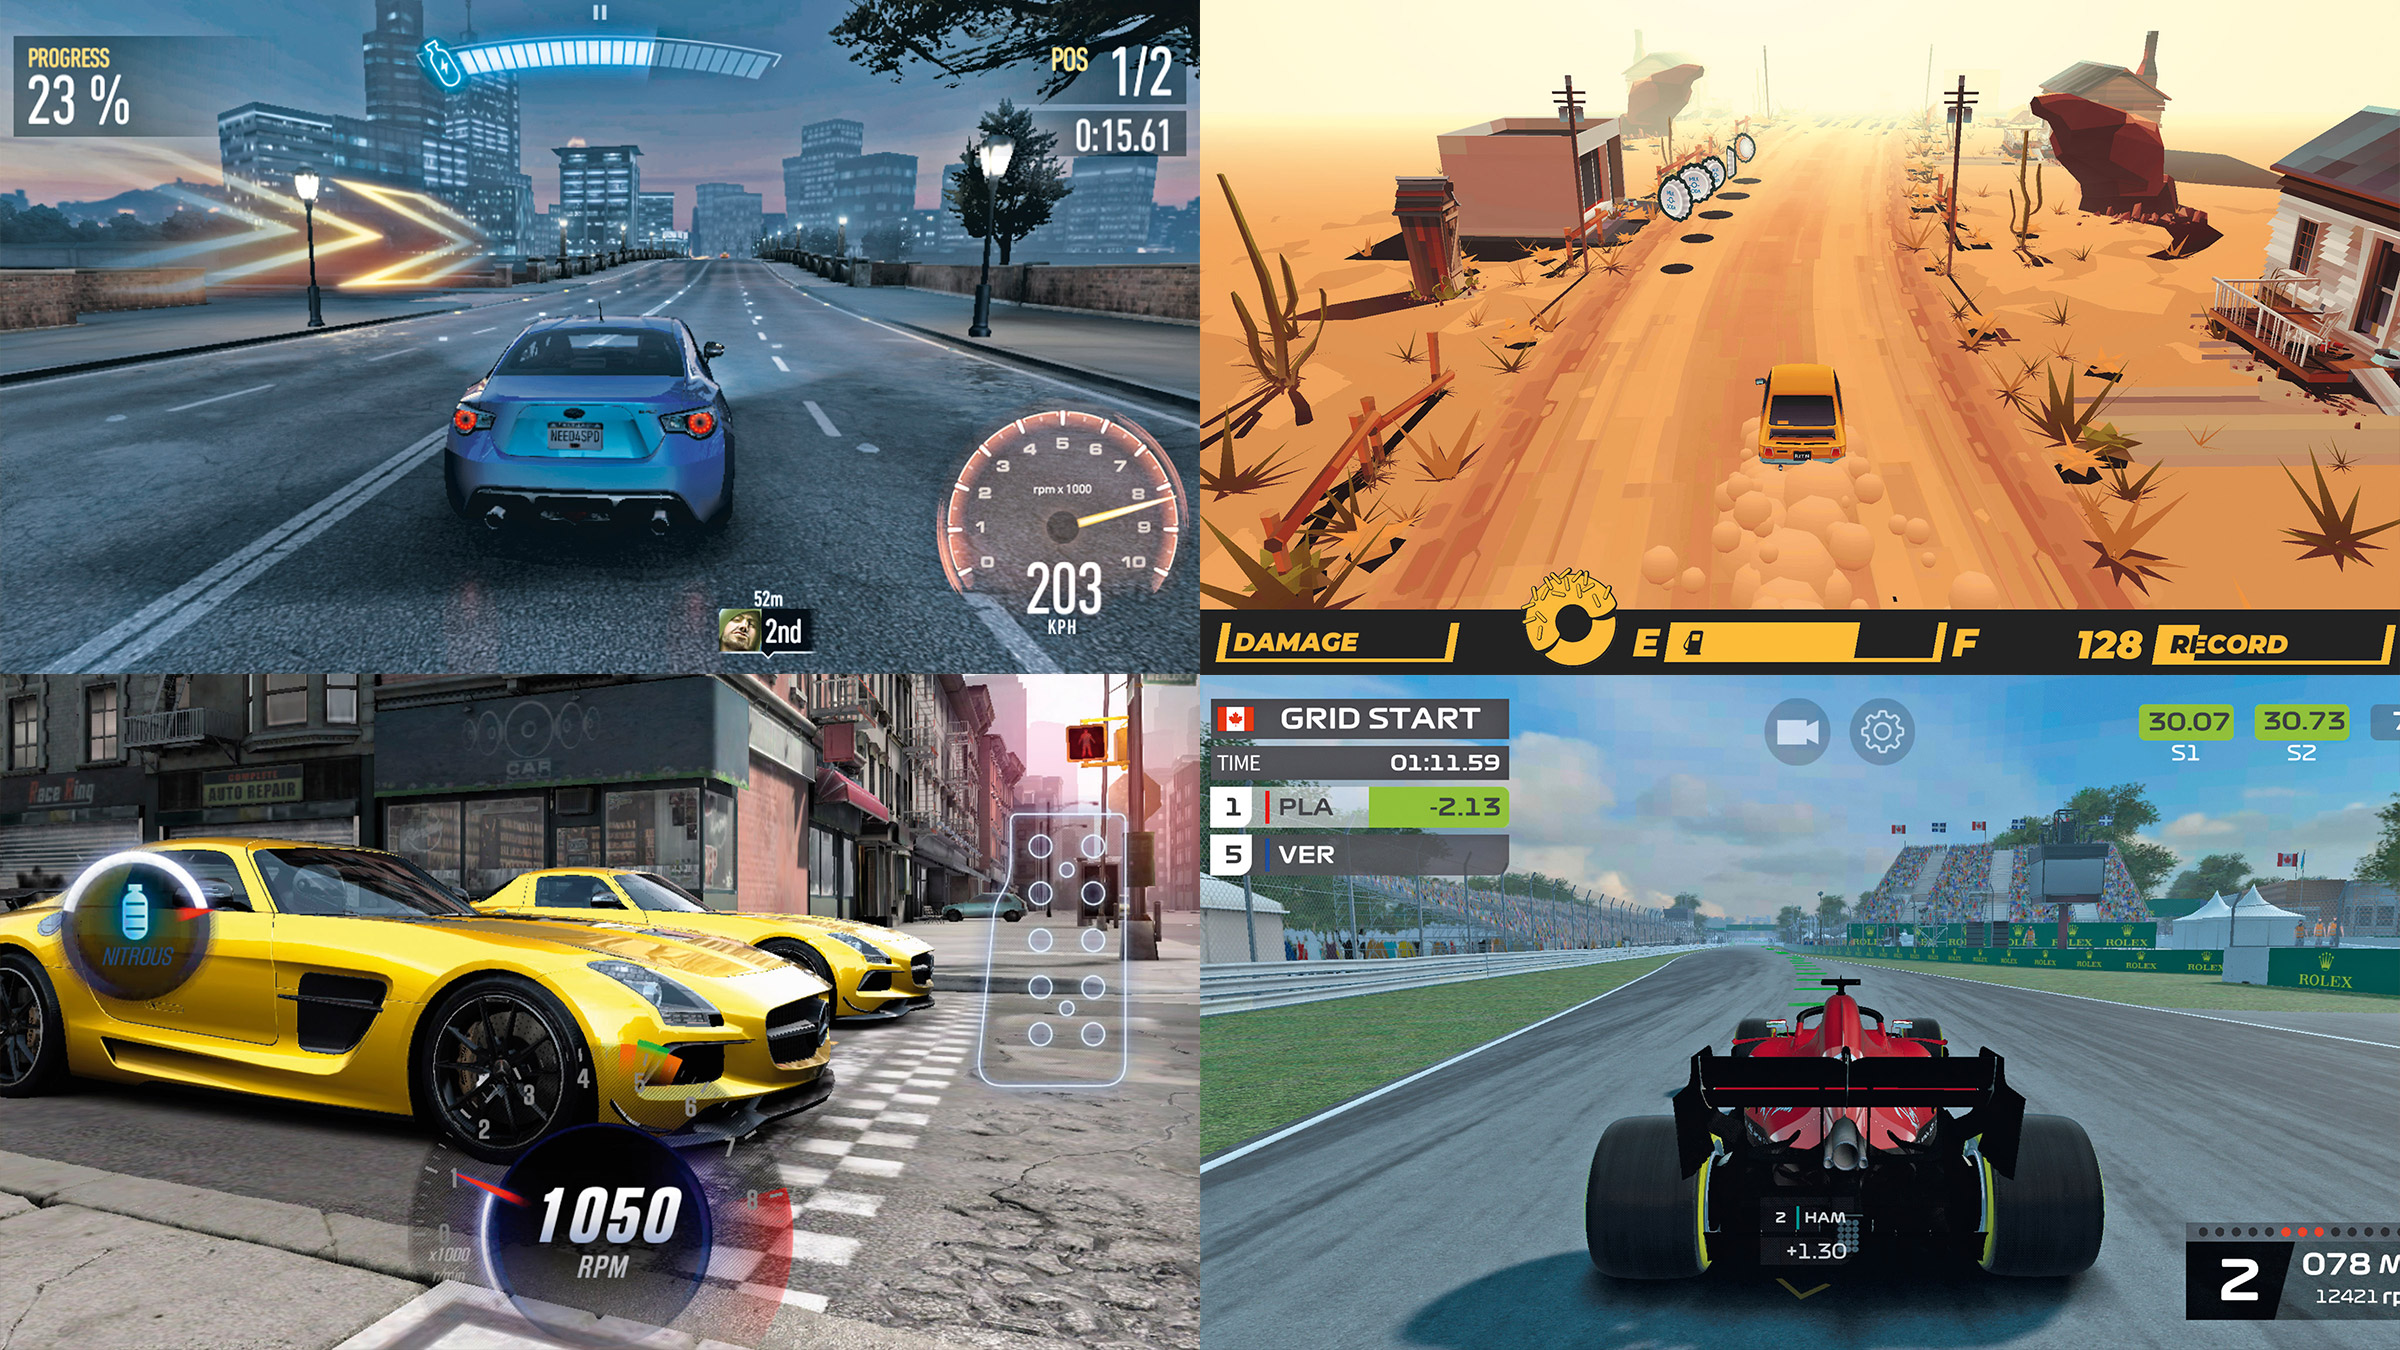 toy car racing video game